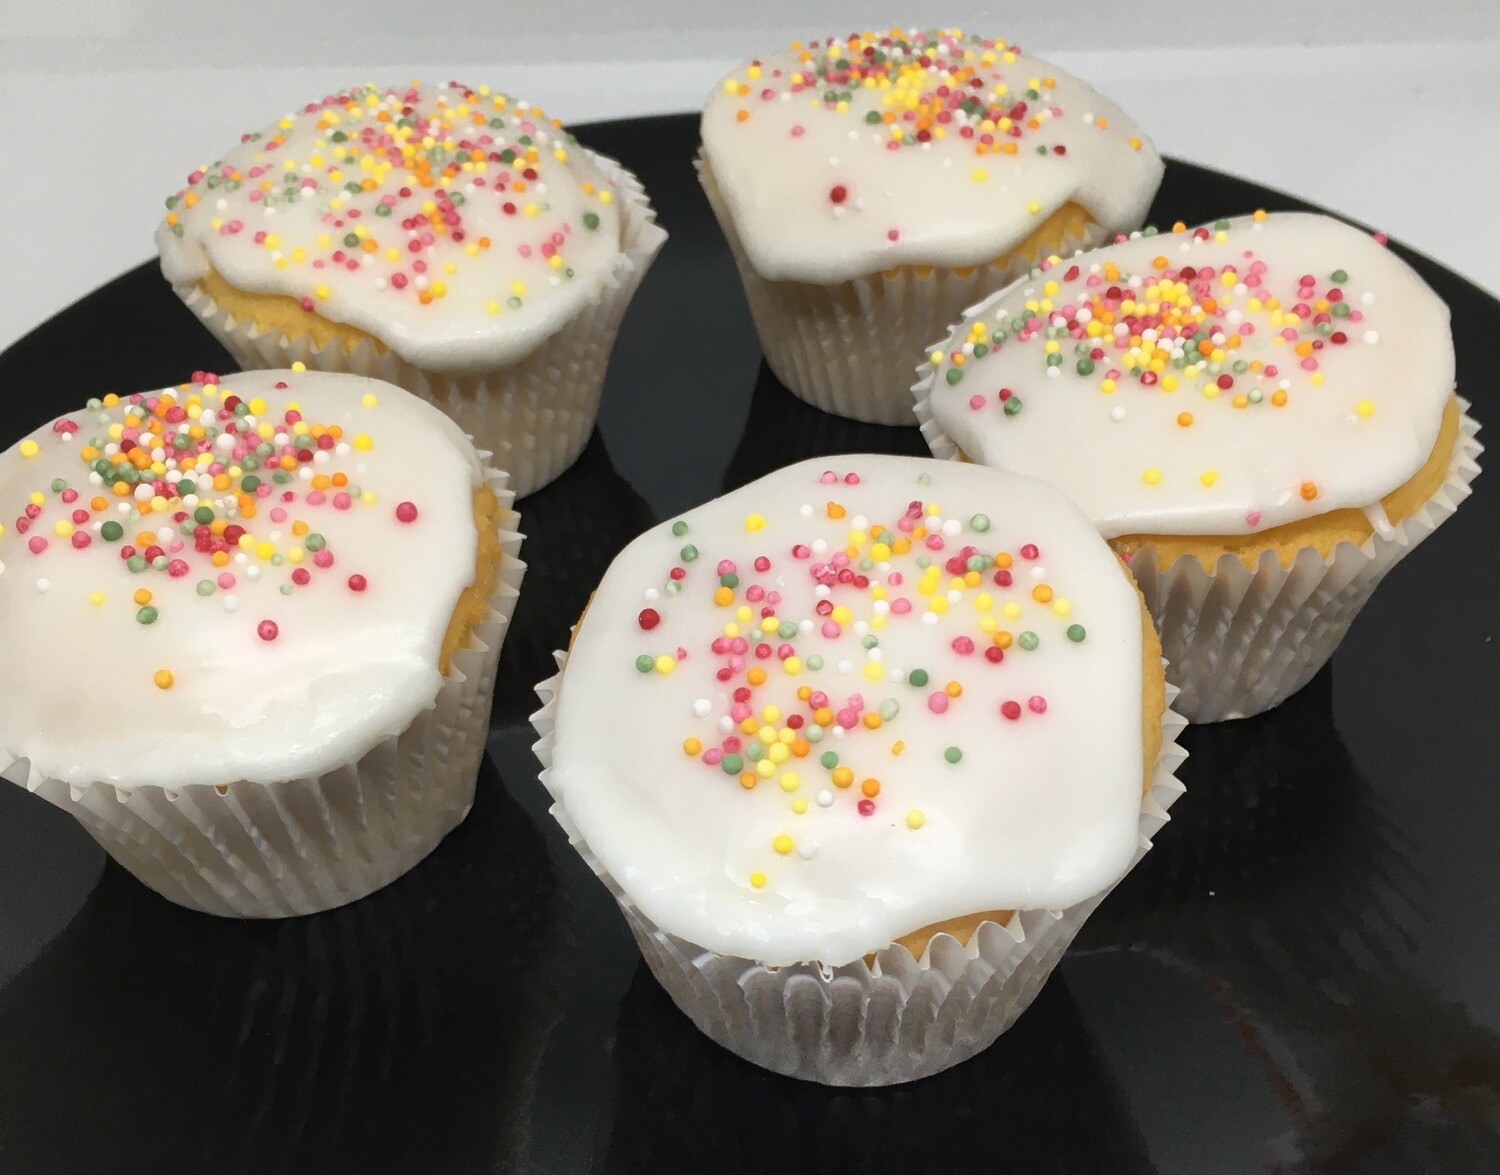 Rick Grant&#39;s Cup Cake Mix. You&#39;ve tried the rest, now try the best!
So light and fluffy. Ideal for school, work or Birthdays. GF, DF, FODMAP.